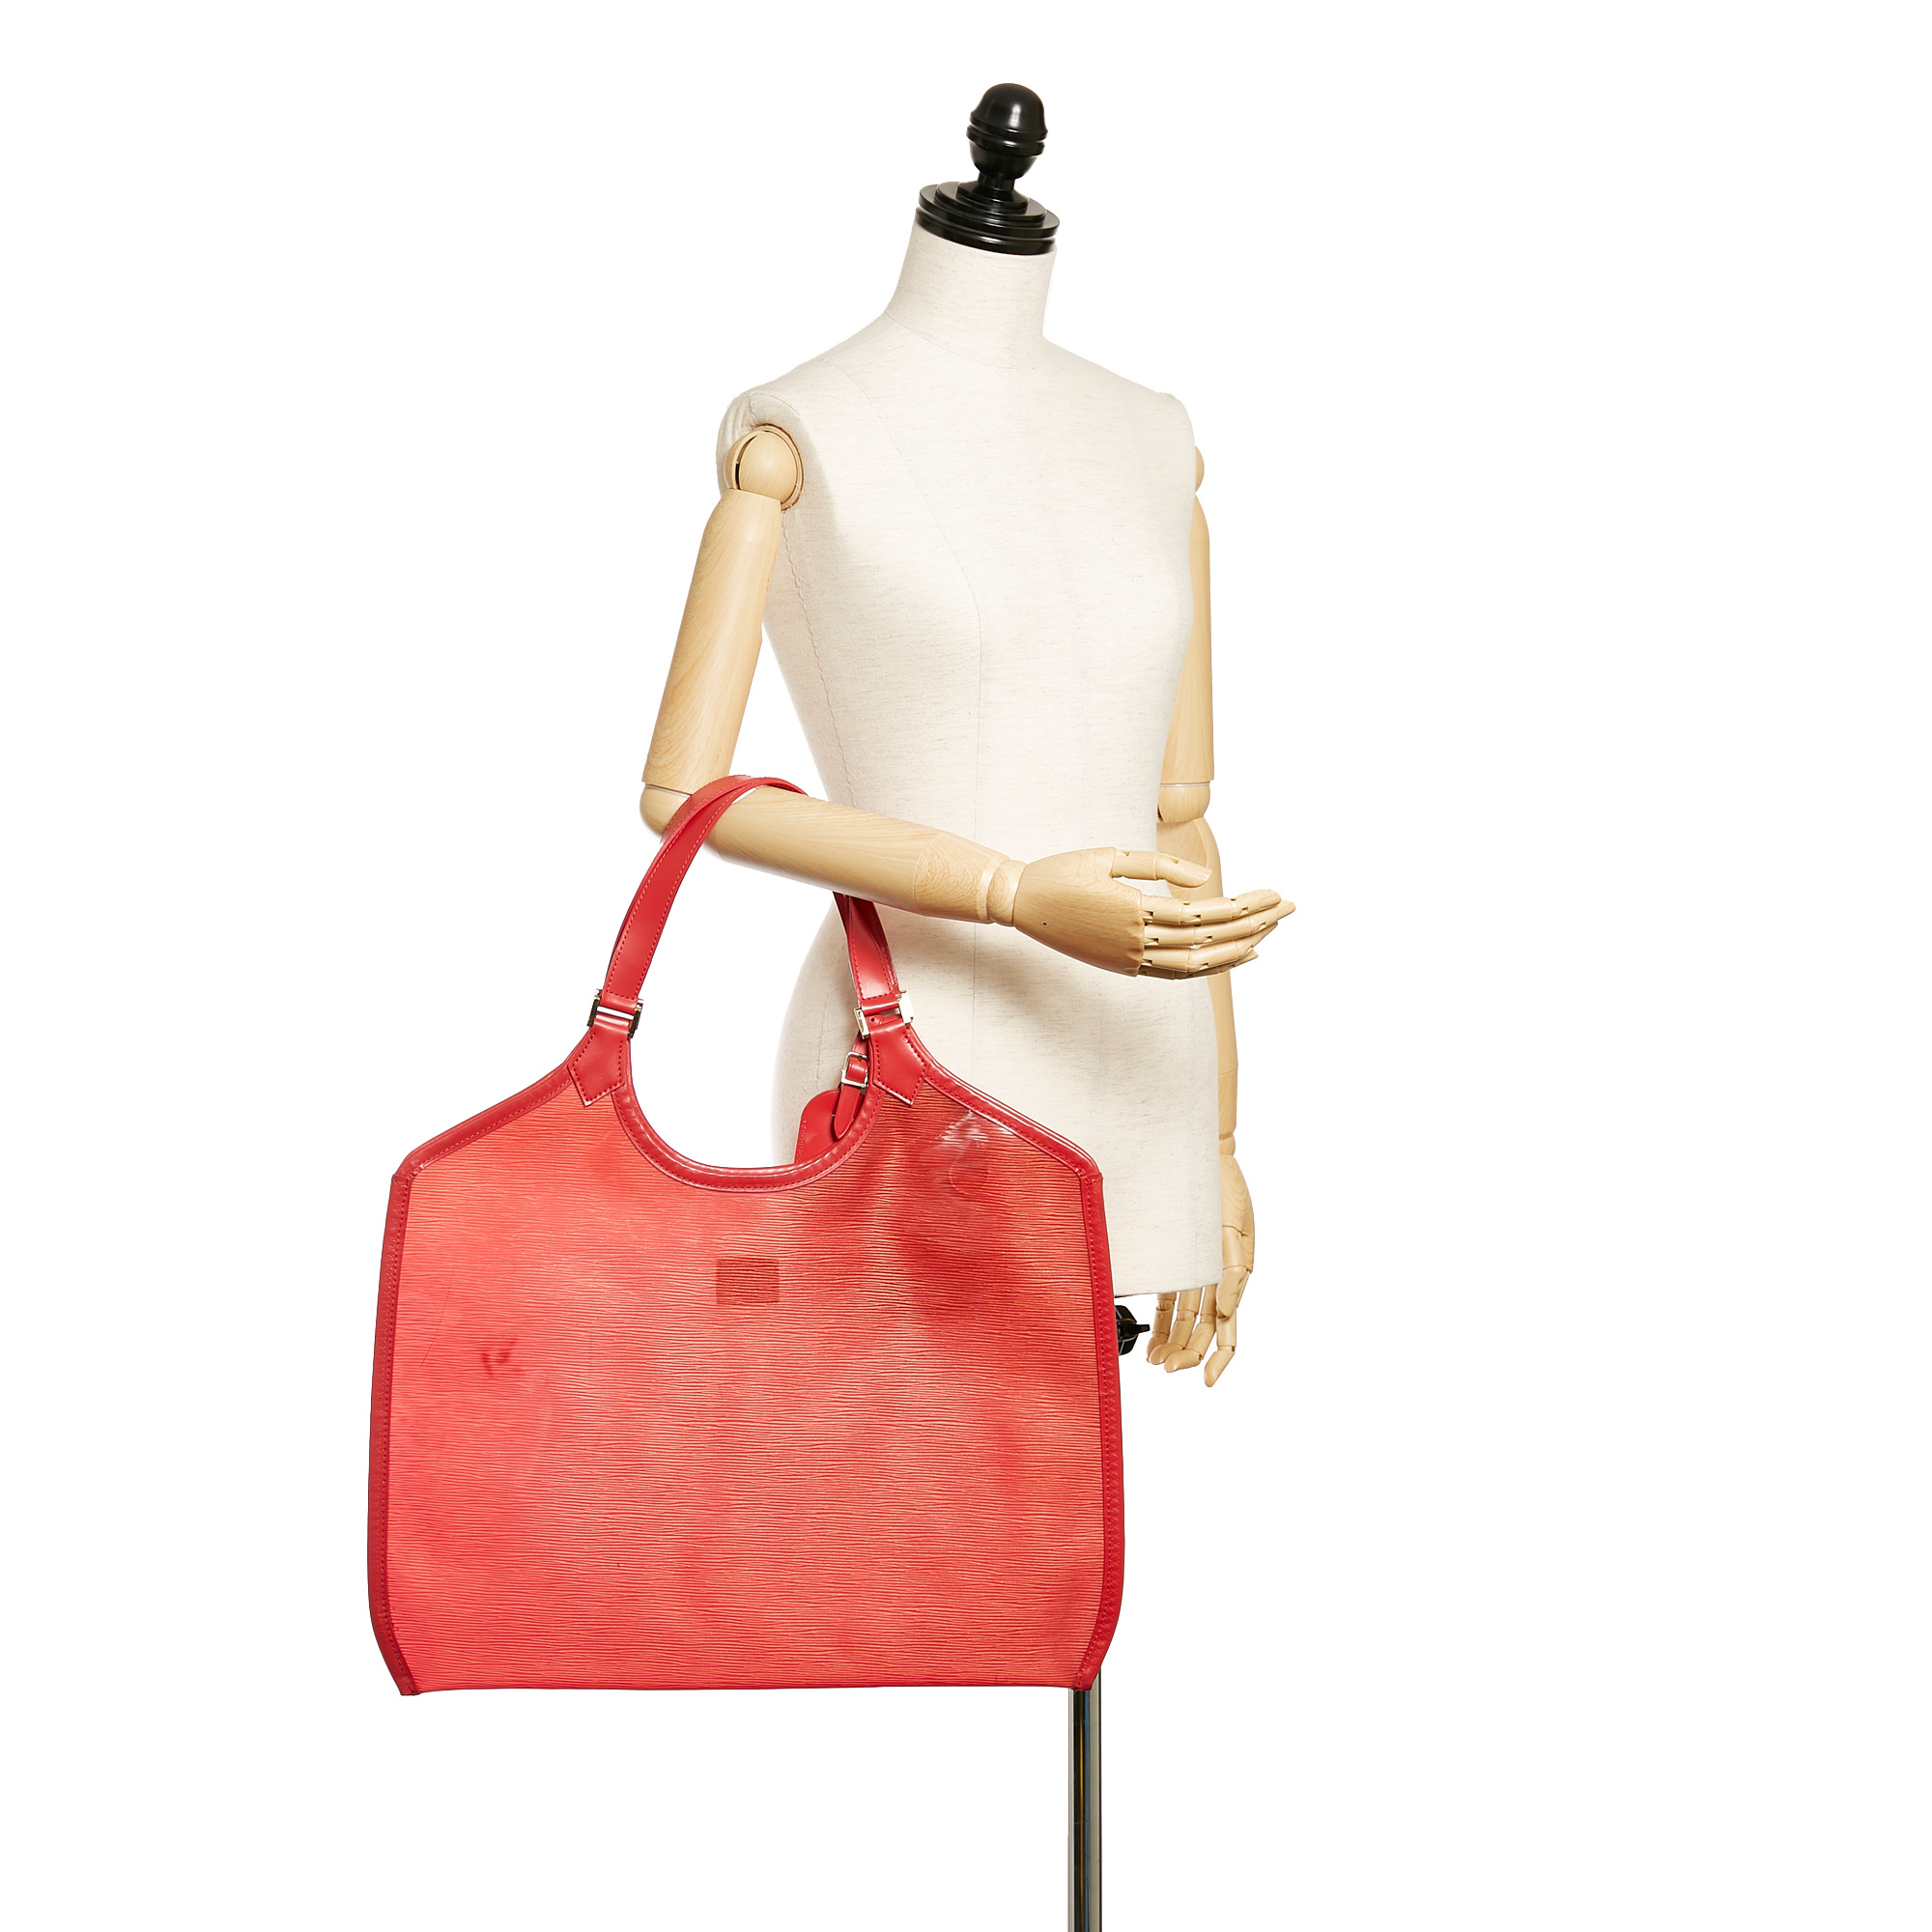 Louis Vuitton Clear Translucent Lagoon Bay Red Epi Plage Tote with